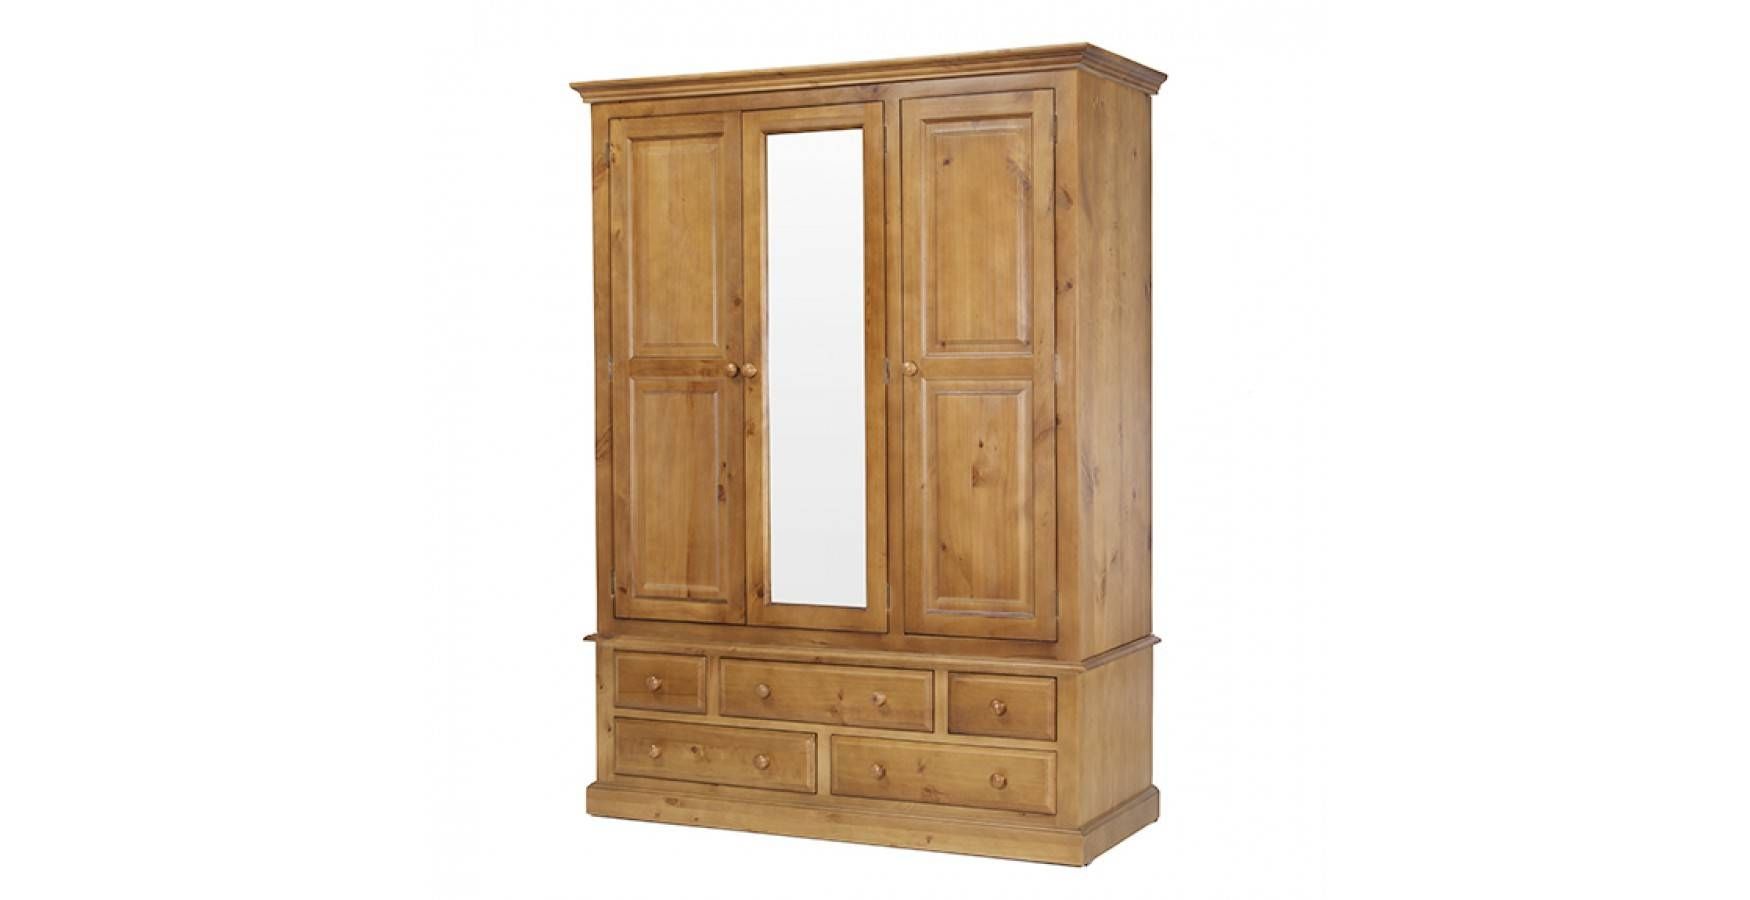 Country Pine Triple Wardrobe With Drawers – Lifestyle Furniture Uk Regarding Pine Wardrobes With Drawers (View 10 of 15)